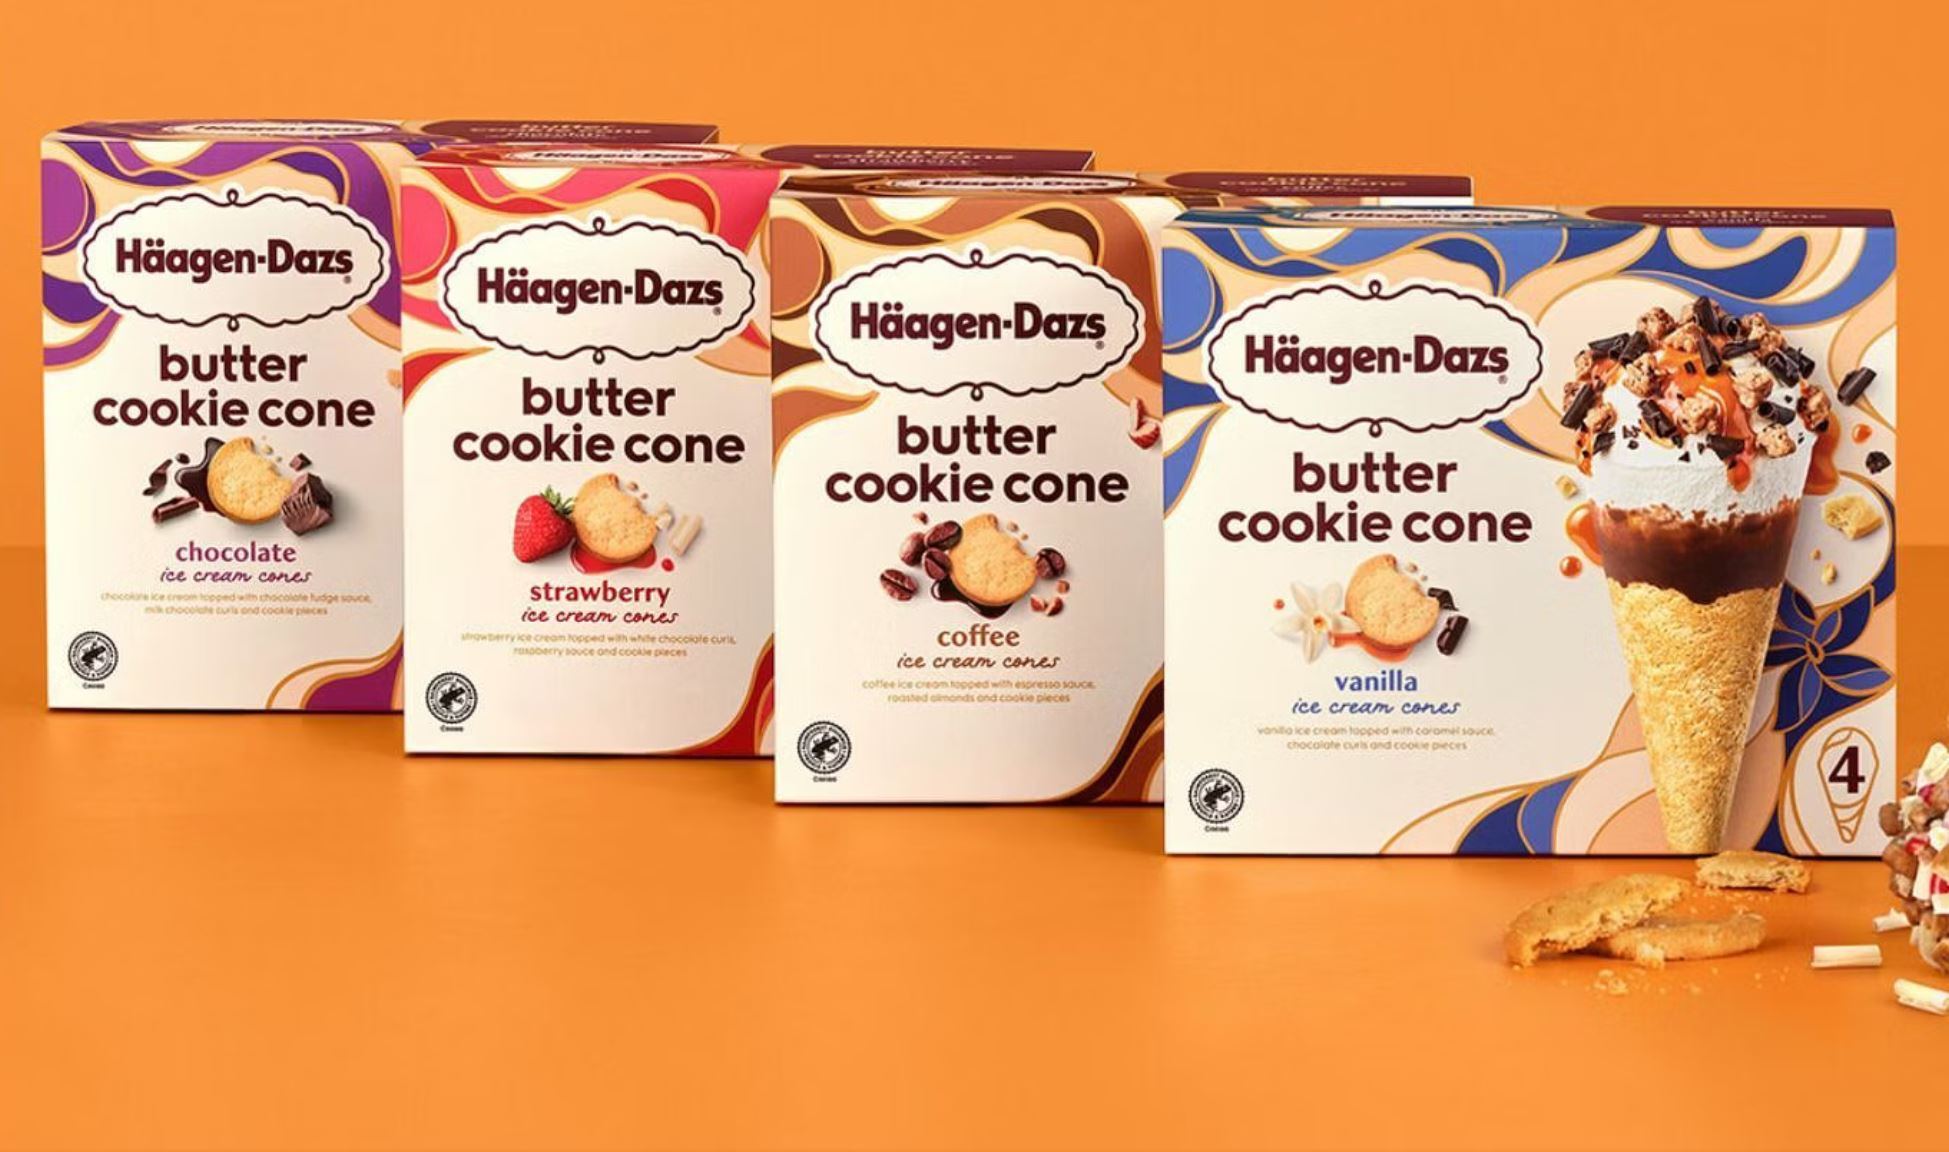 Target YMMV Save 30% on Haagen Dazs Cookie Ice Cream Cones with Target Circle $5.59